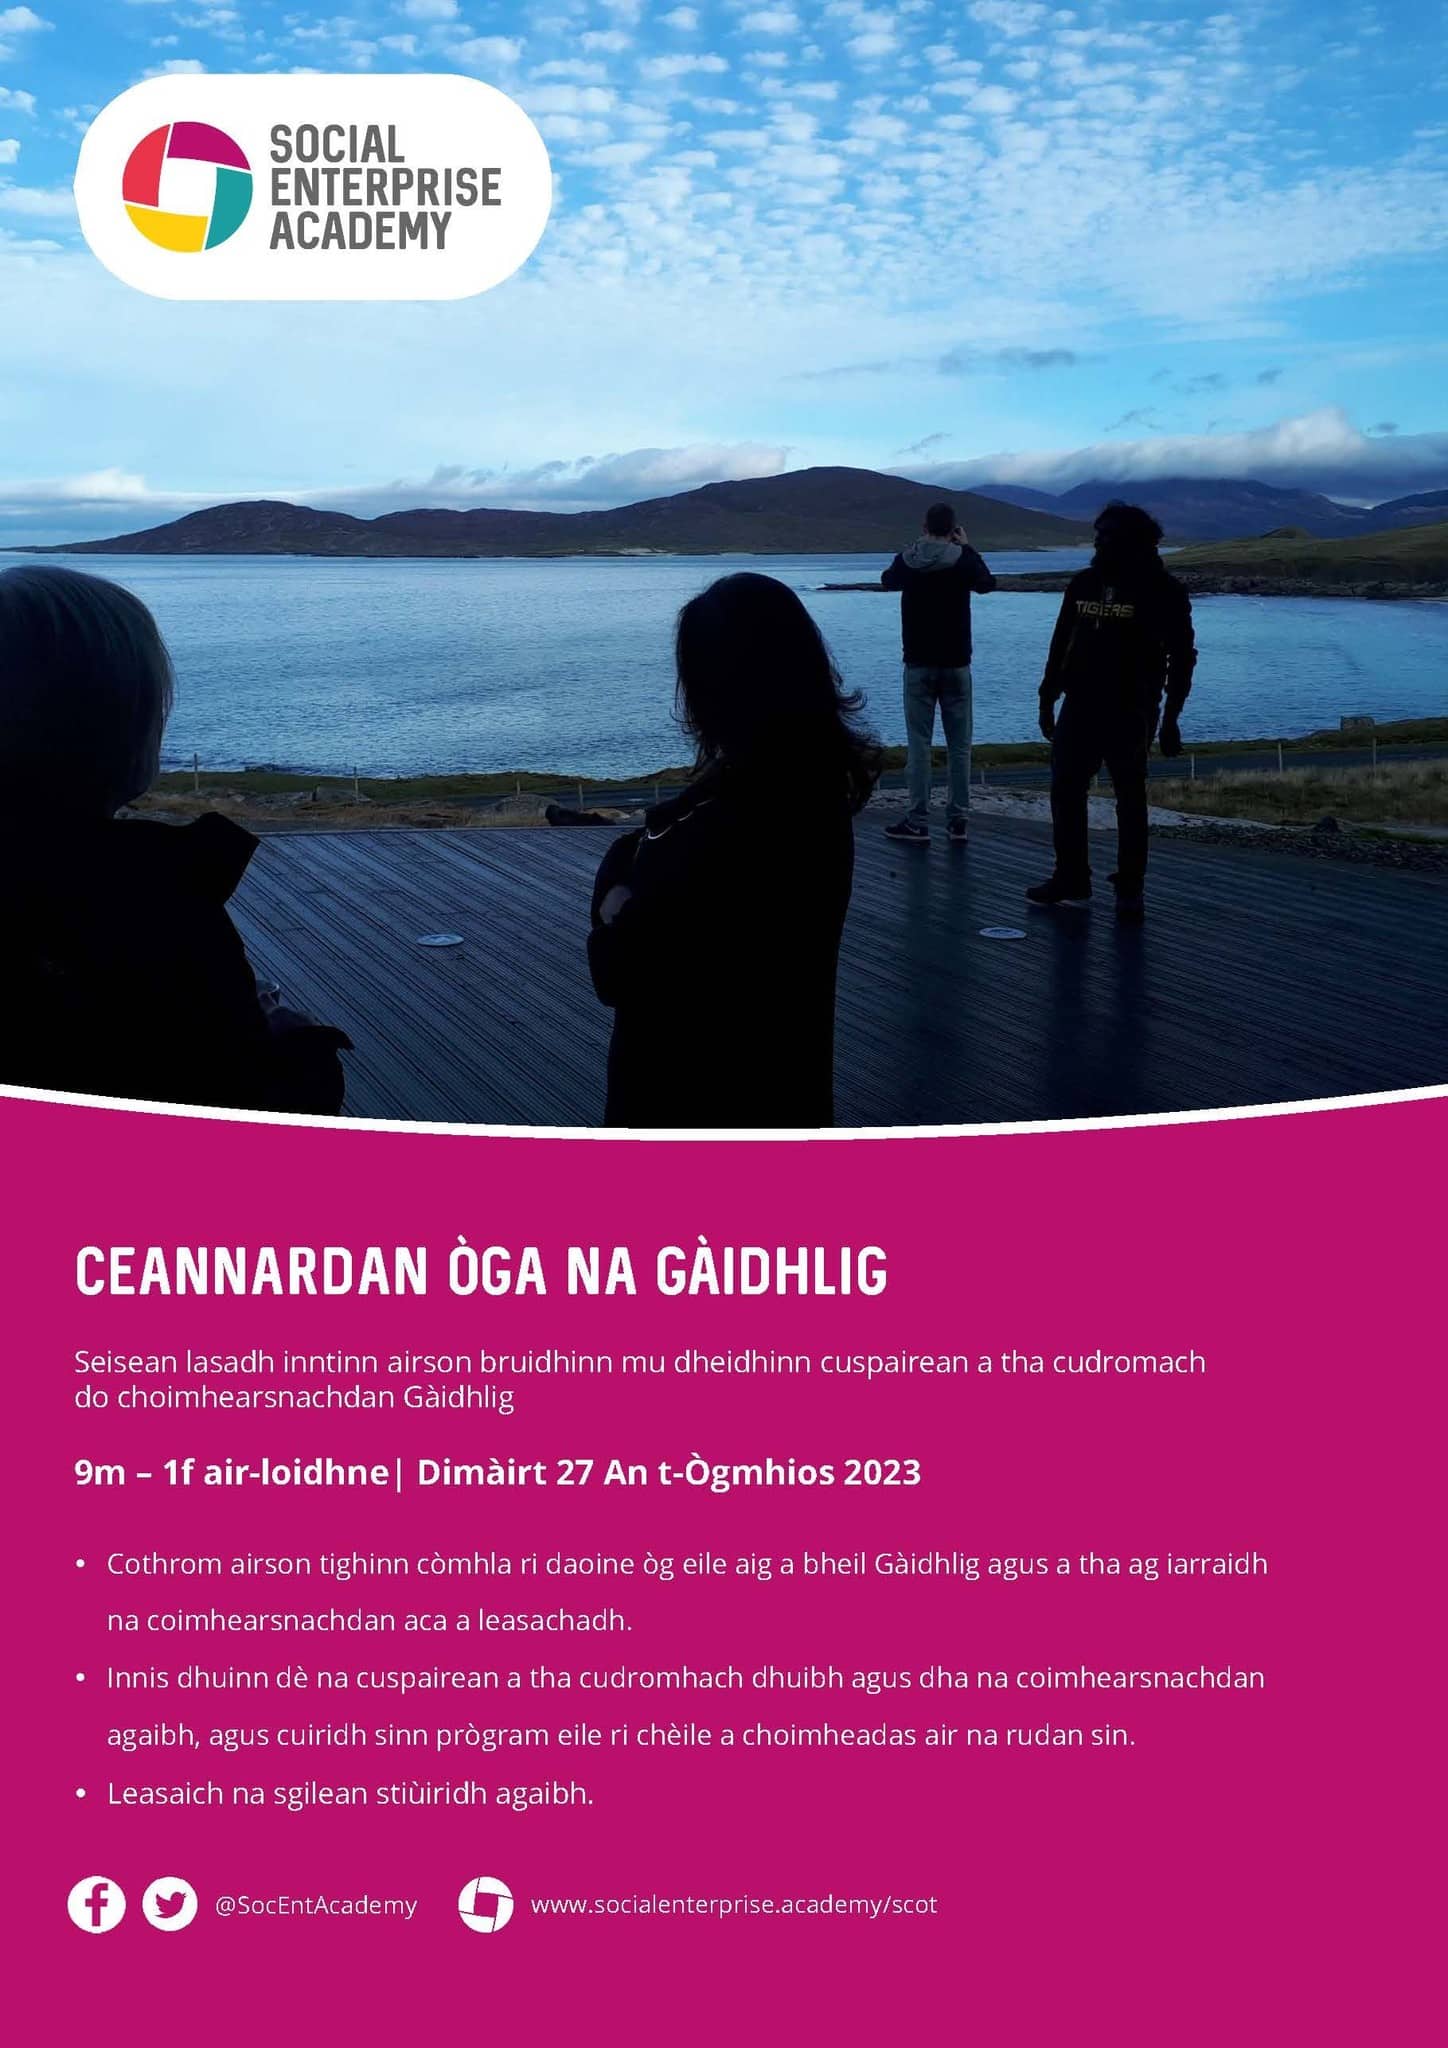 Calling all Gaelic speakers aged 18-40 from the Highlands and Islands!